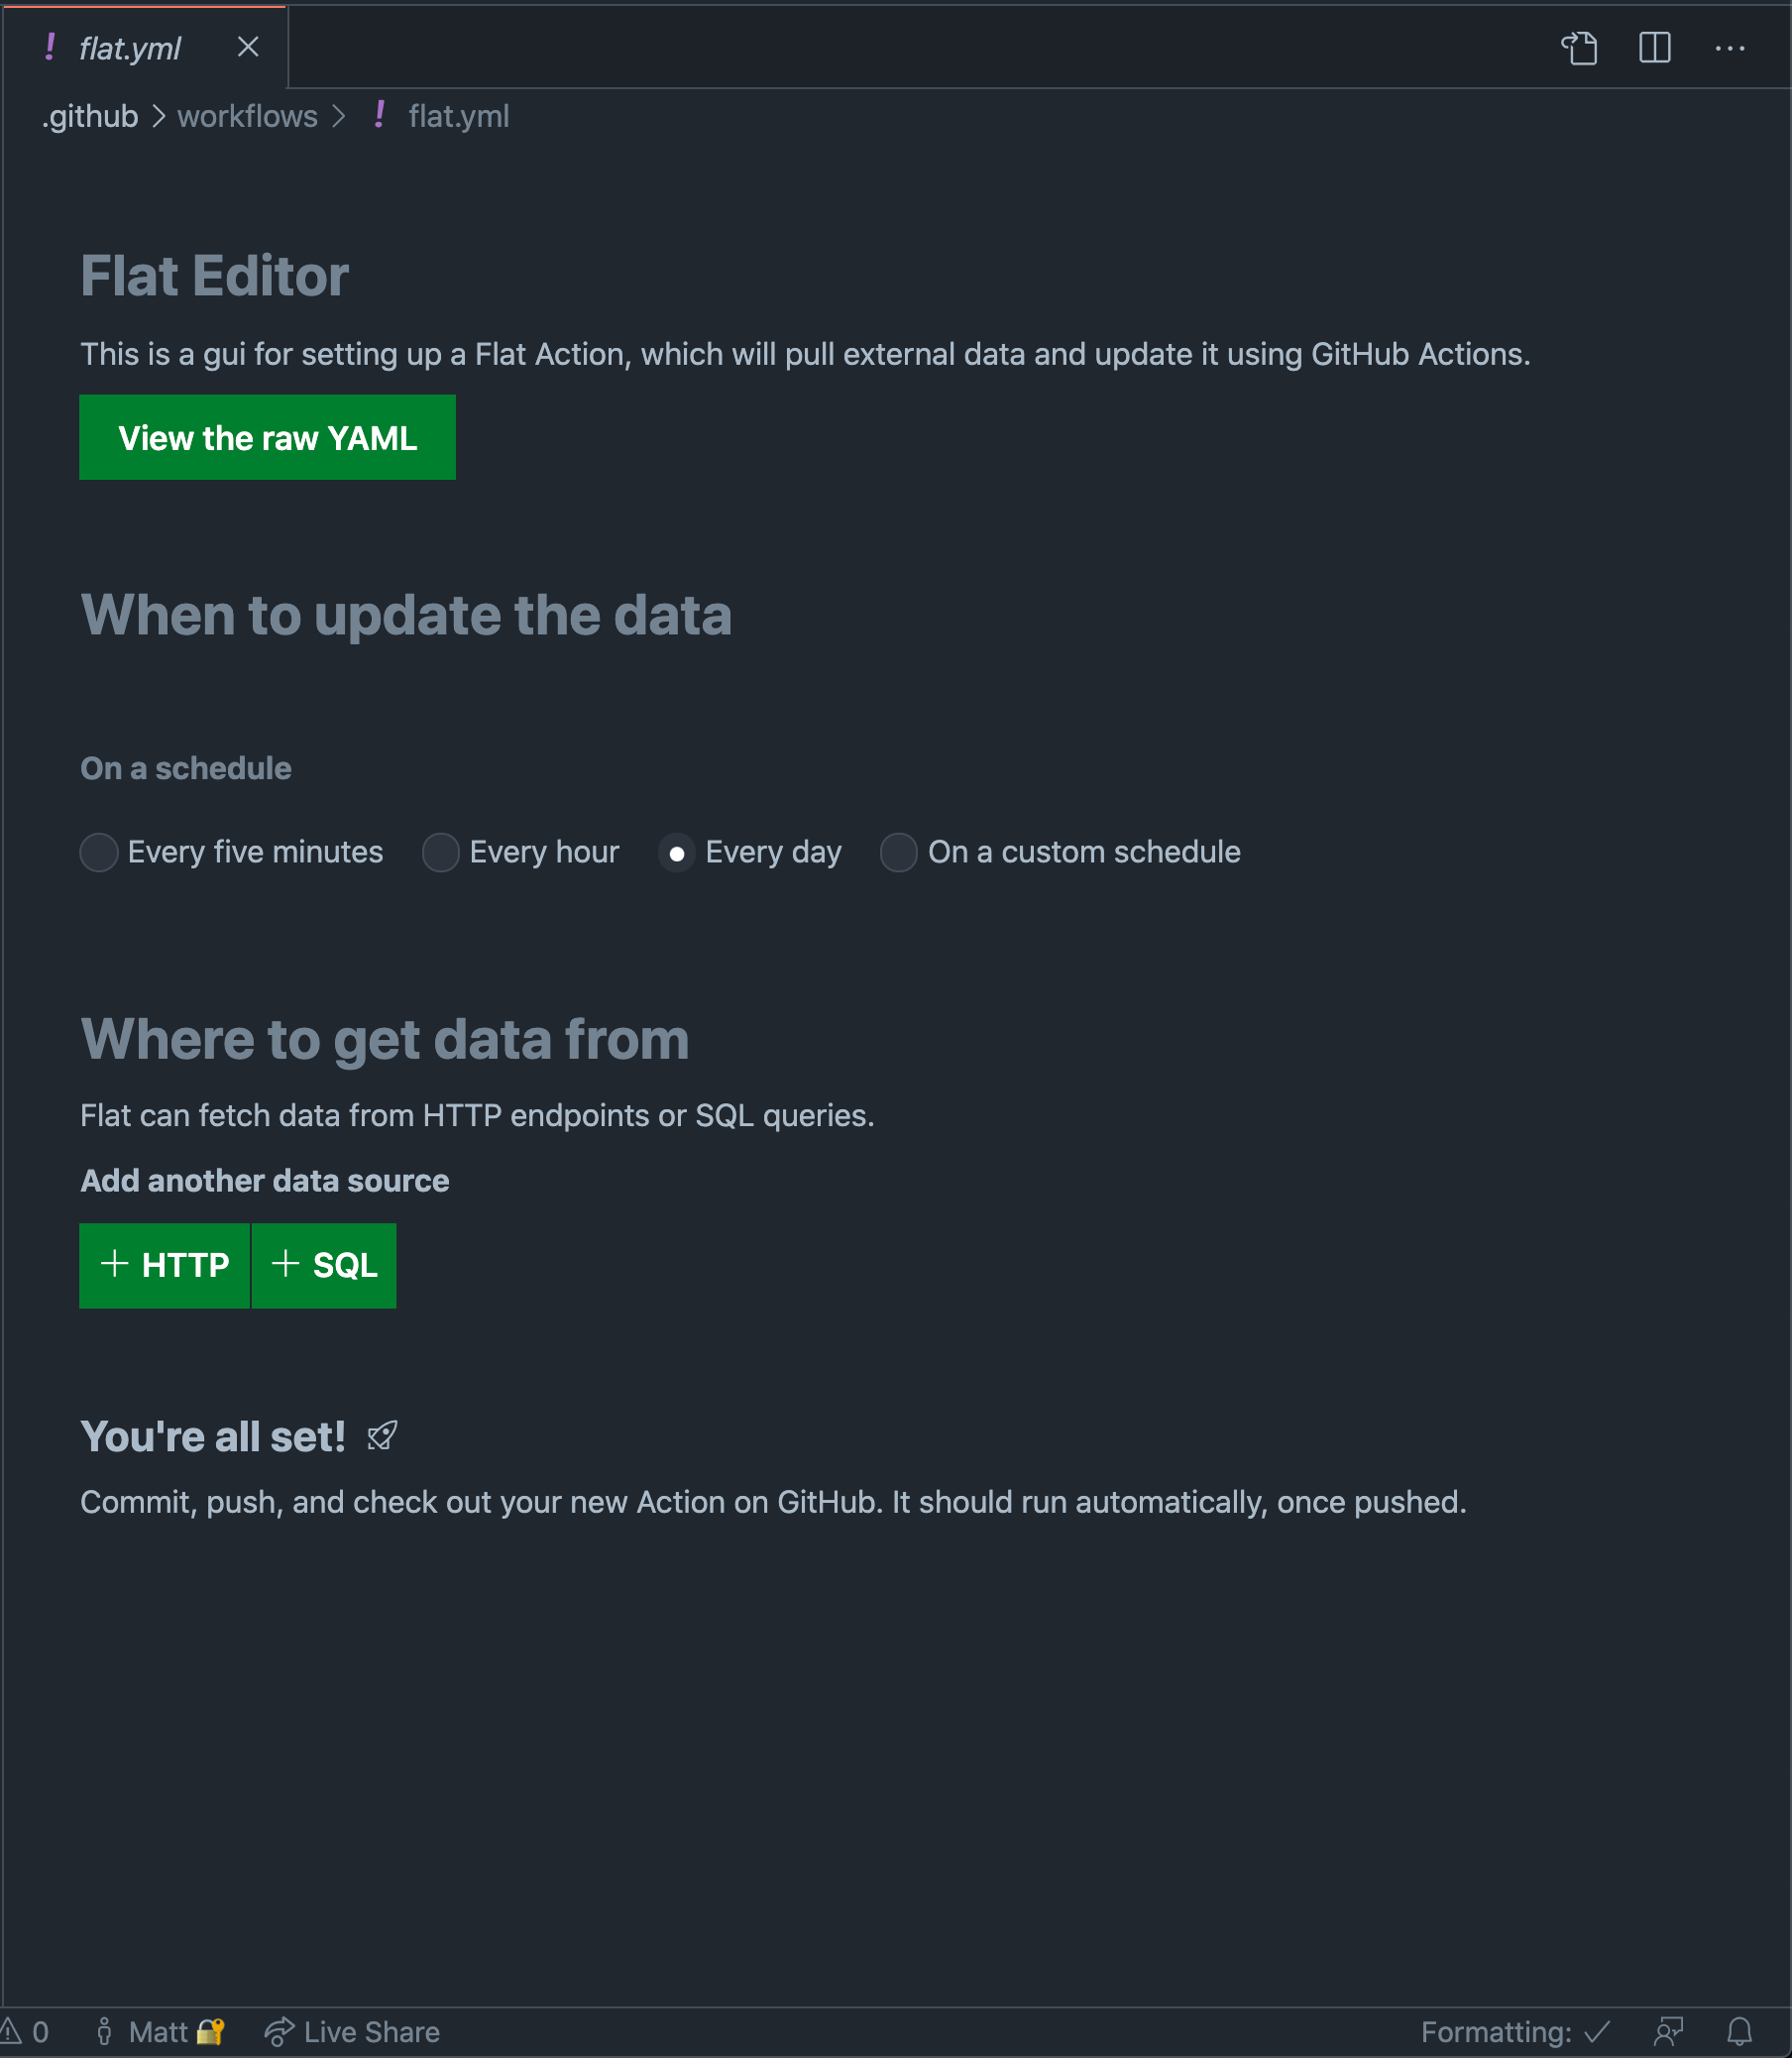 First version of Flat Editor.